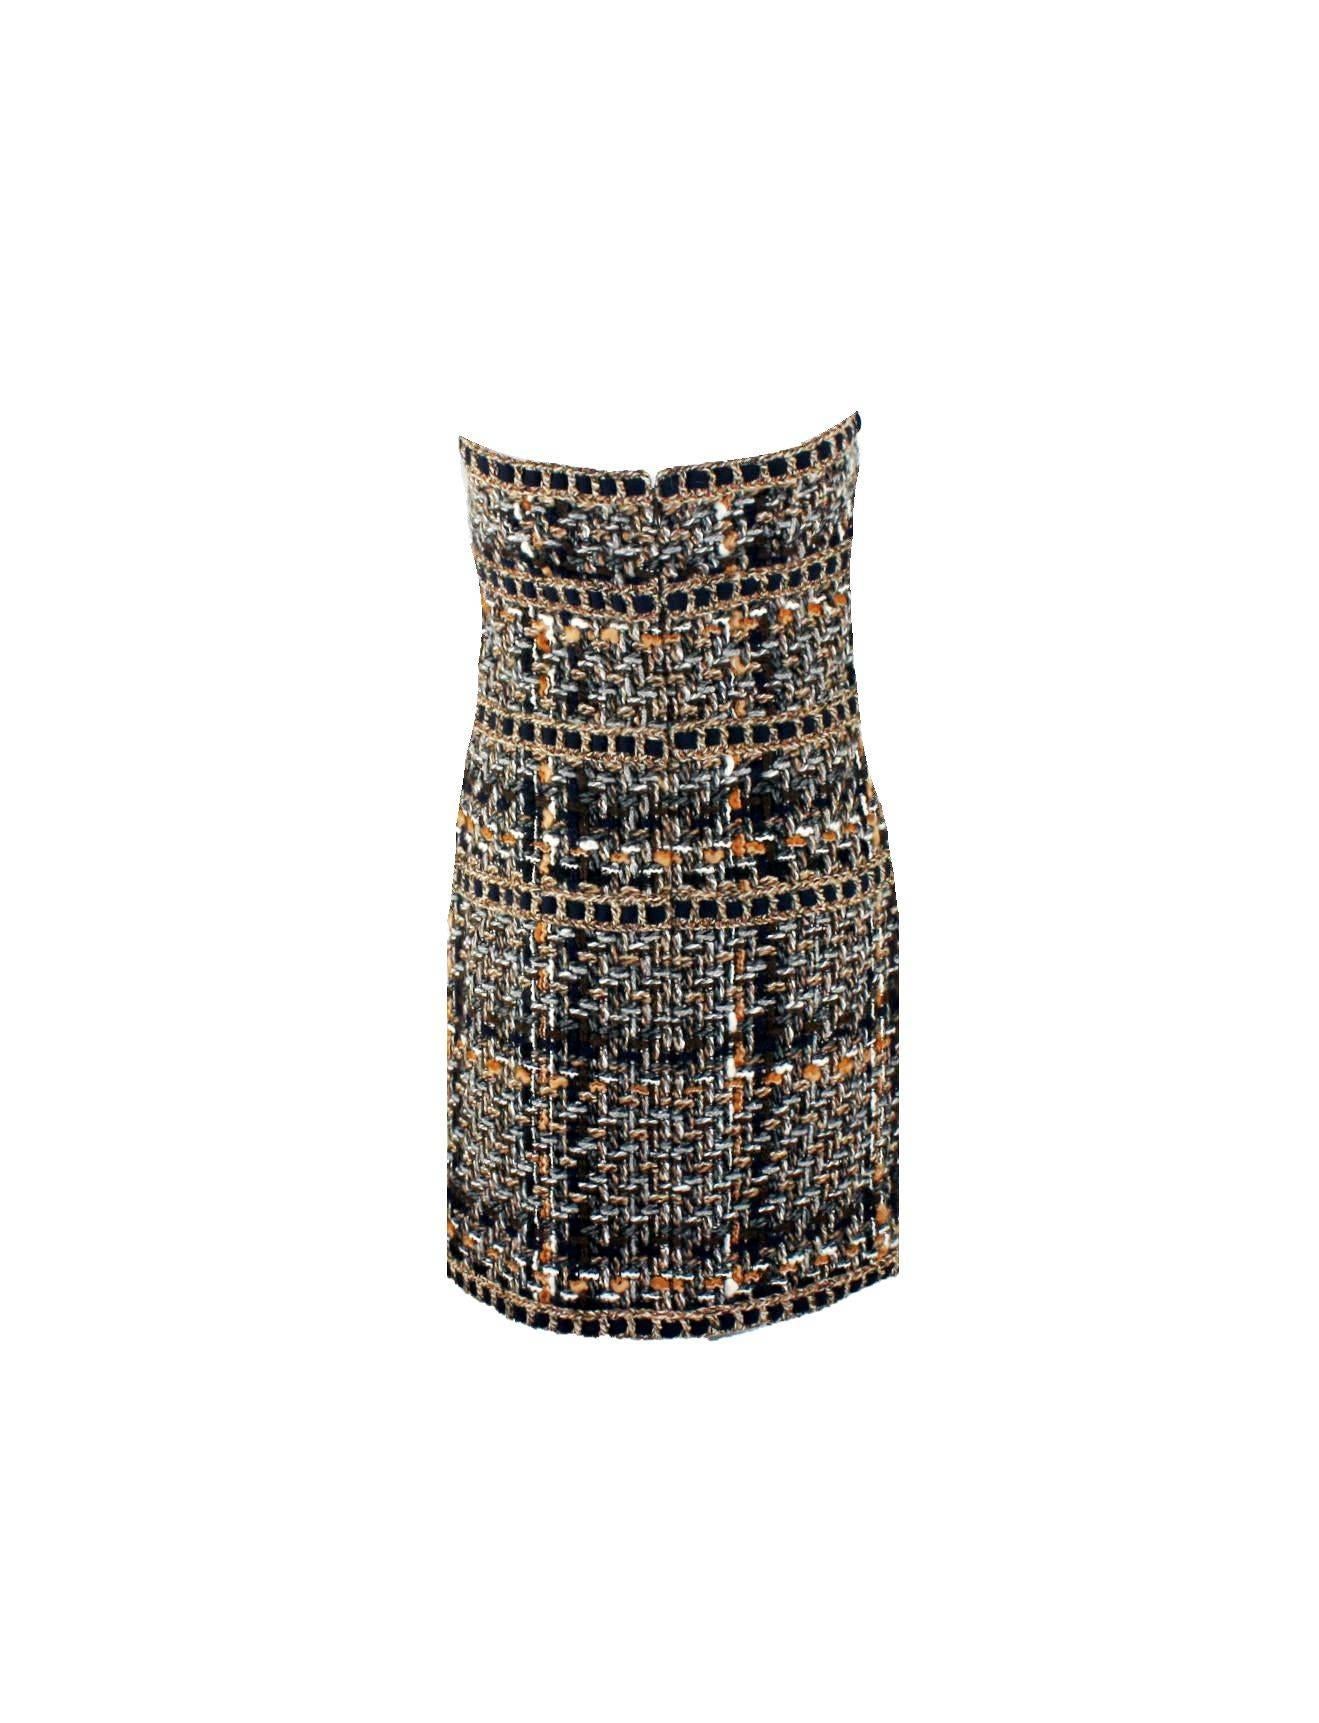 Stunning CHANEL signature tweed dress
Beautiful hand-braided details
Finest fantasy tweed fabric exclusively produced for Chanel by Maison Lesage
Fully lined with Chanel CC logo silk
Rubber band inside for a perfect fit
Closes with zipper in the